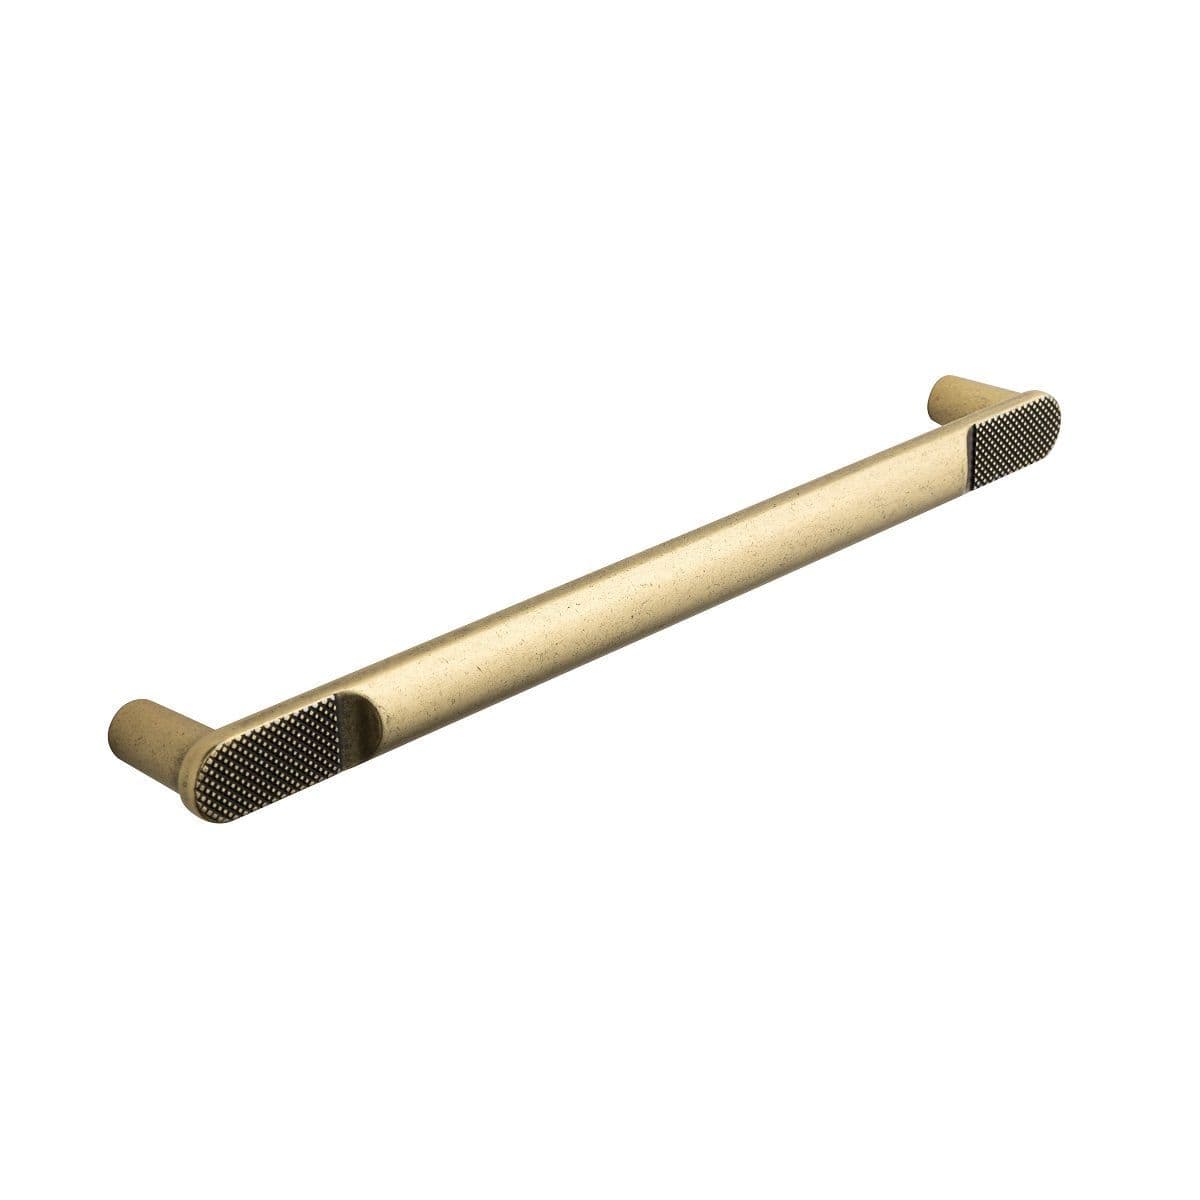 YARM KNURLED D Cupboard Handle - 192mm h/c size - 3 finishes (PWS H1162.192)